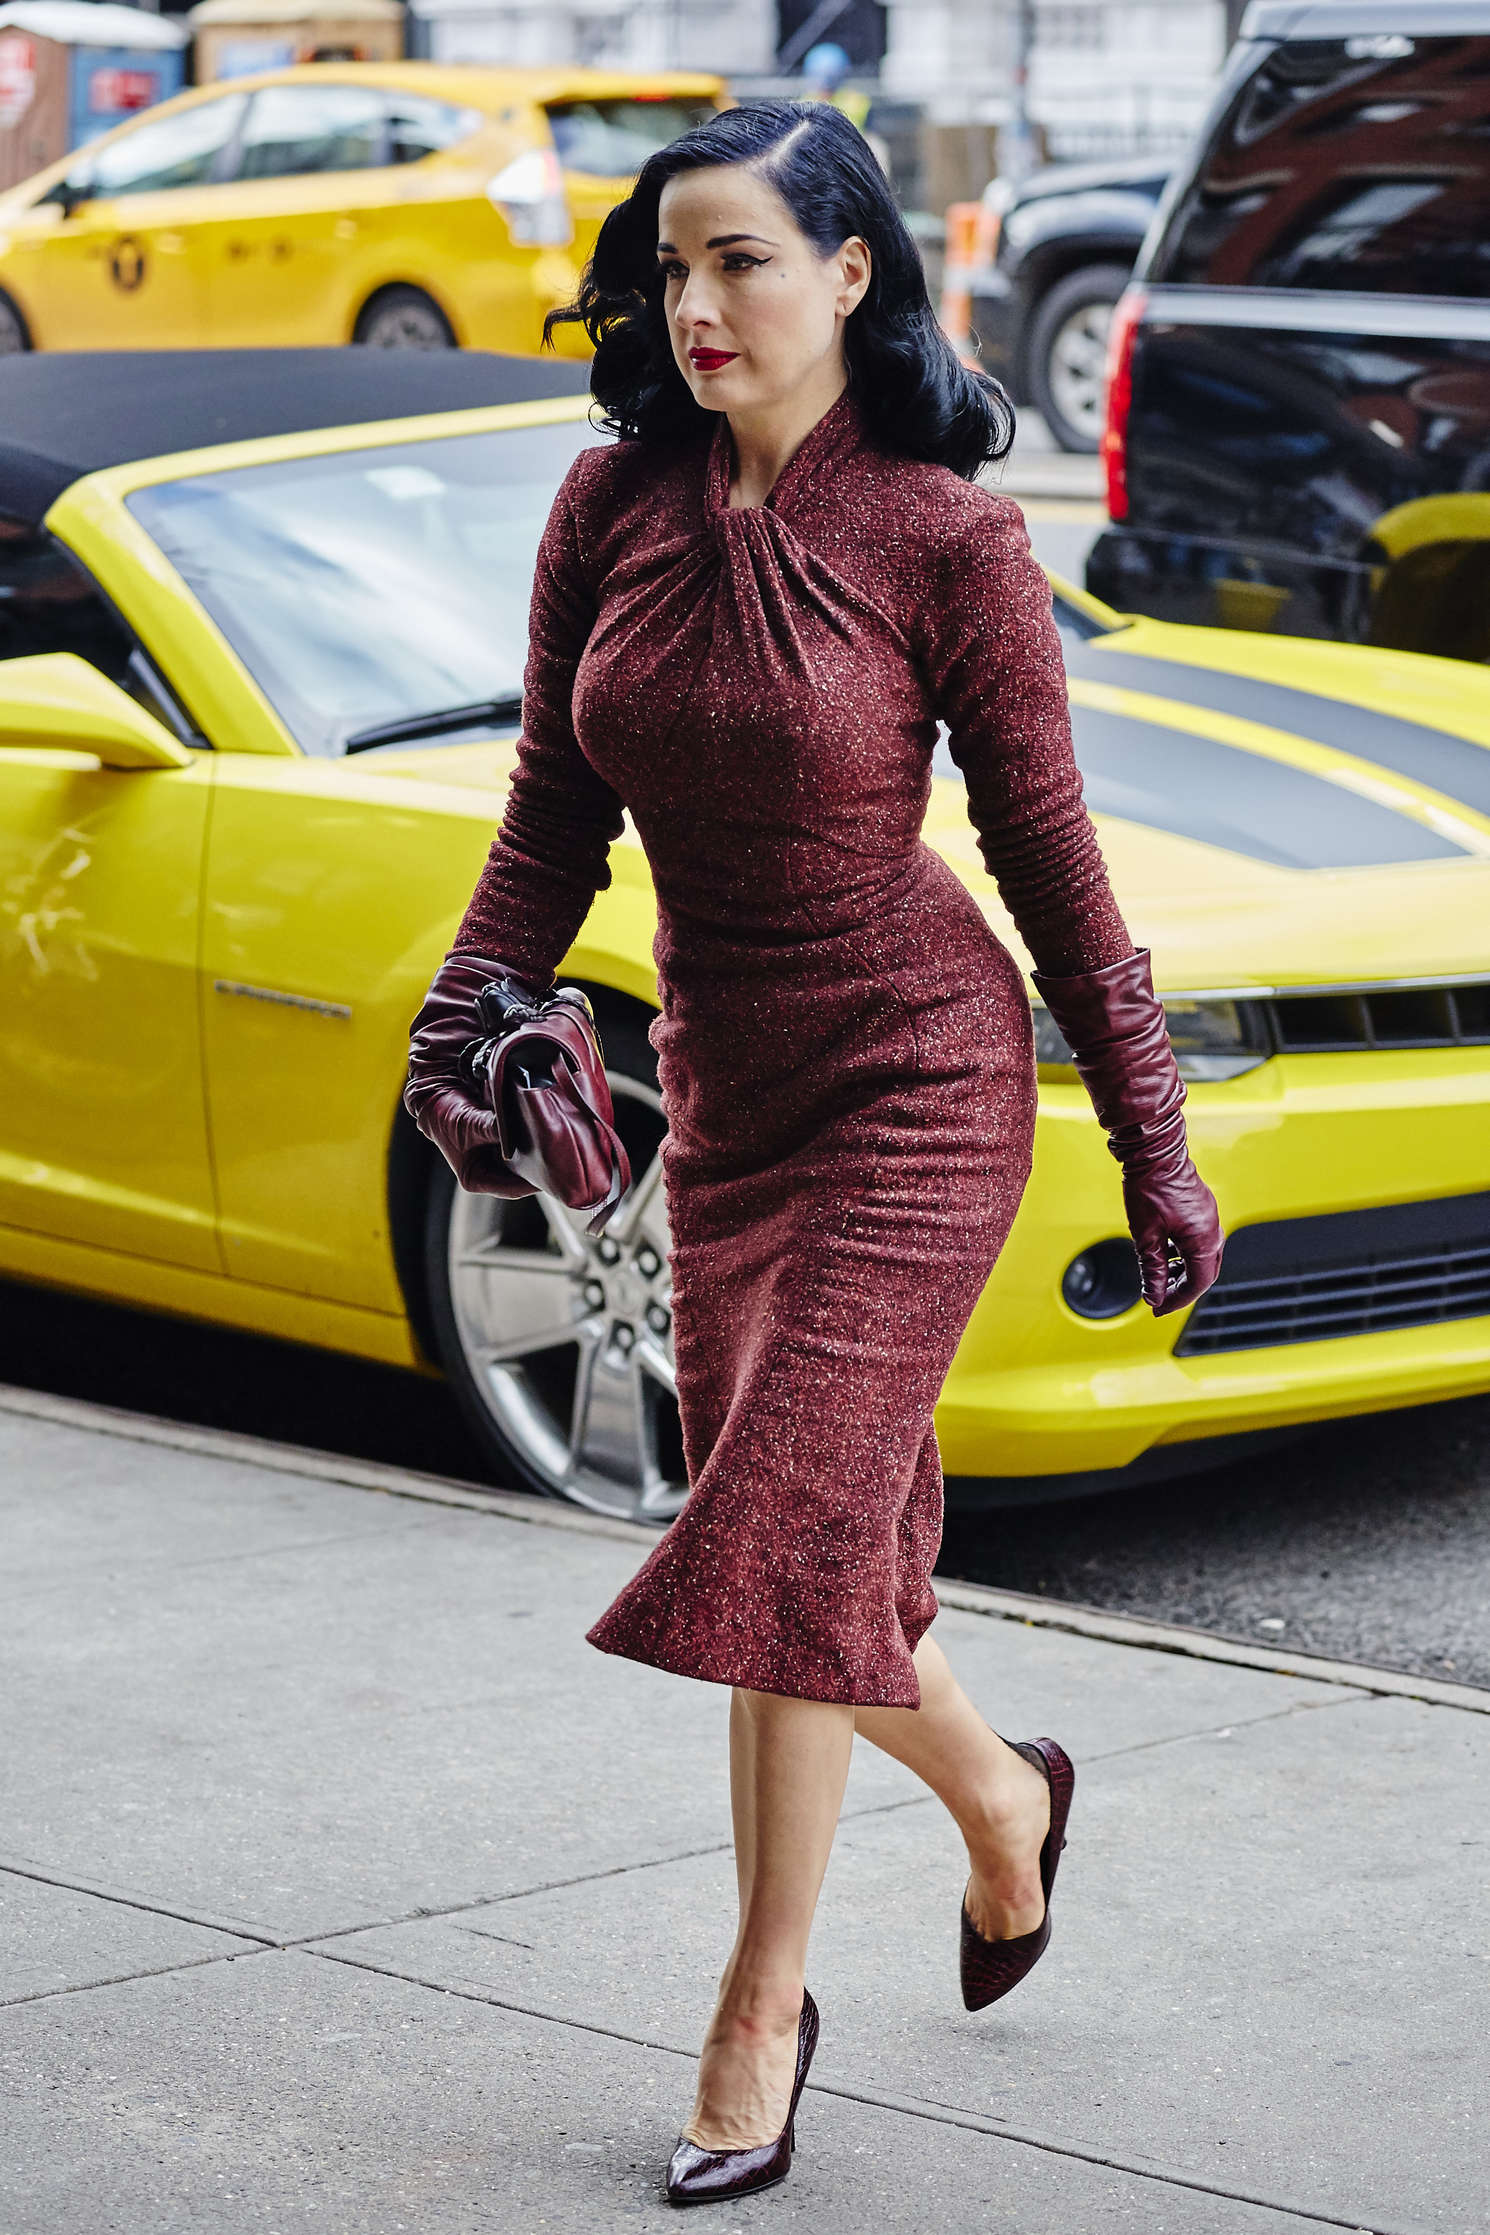 Dita Von Teese - Arriving at her hotel in New York City